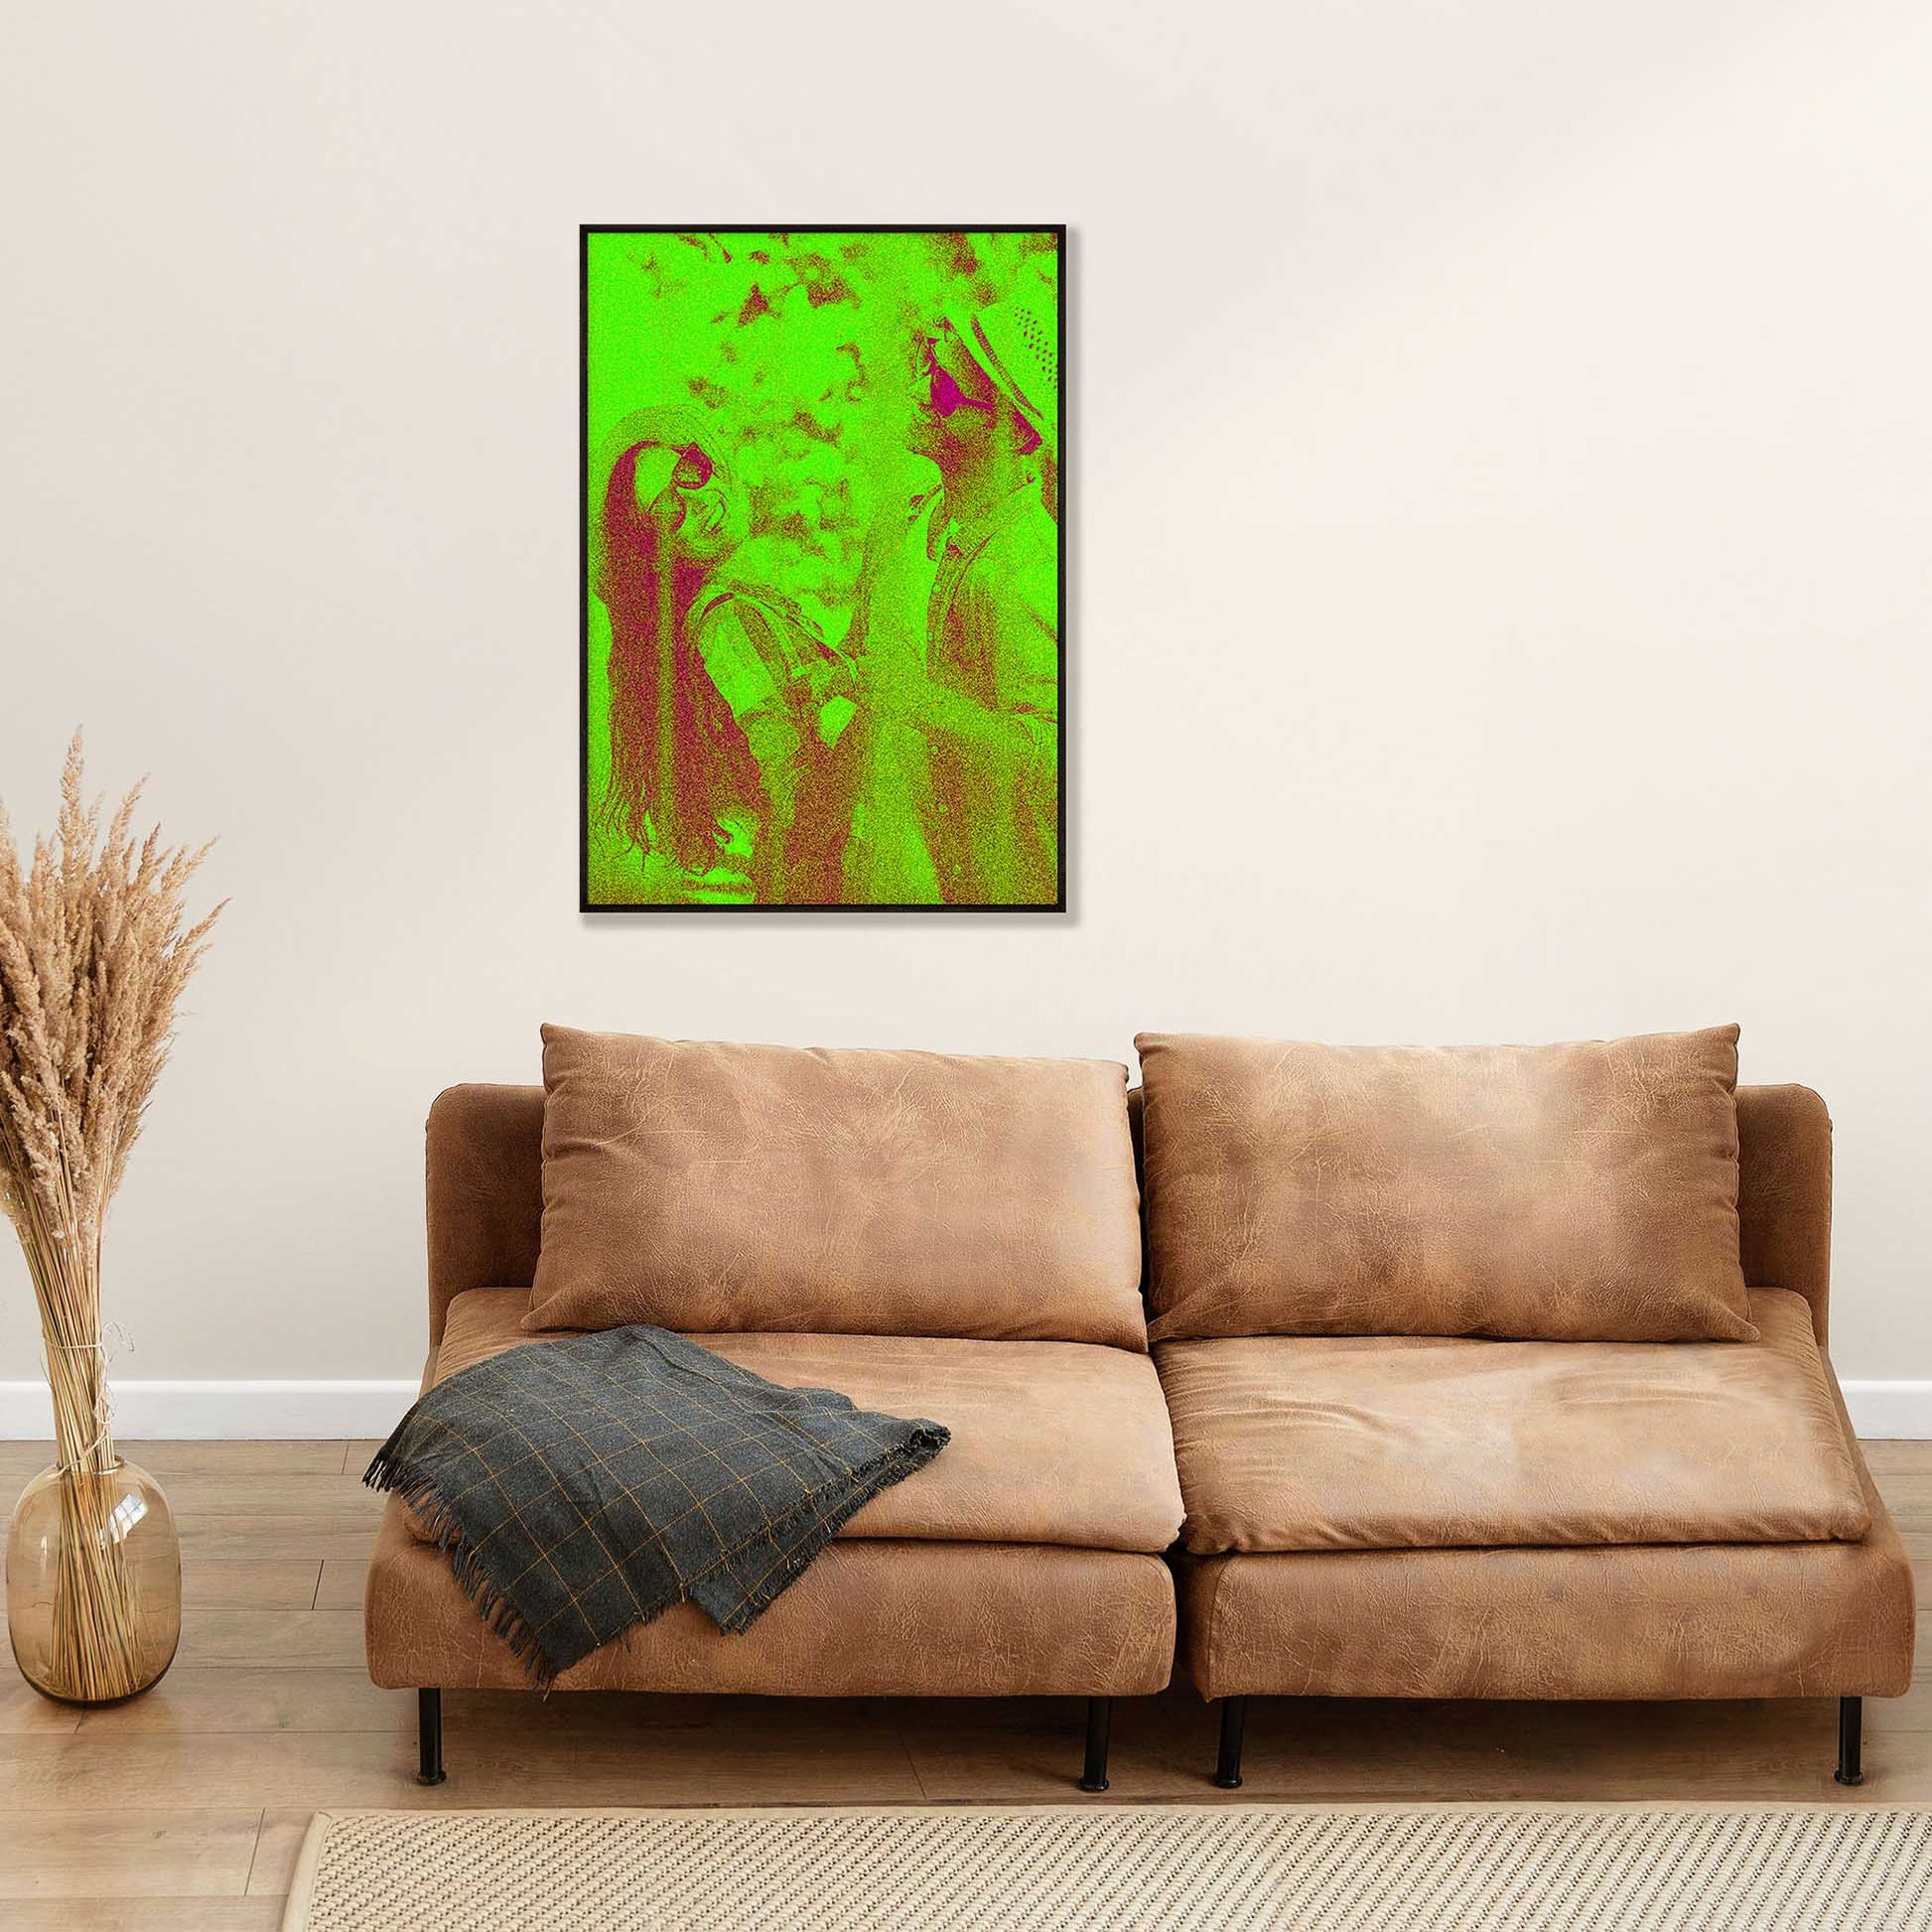 Embrace the neon green radiance with our Personalised Neon Green Framed Print. The bold and vibrant hues exude a lively and playful energy that lights up your space. Crafted from your photo, this print showcases a truly unique artwork